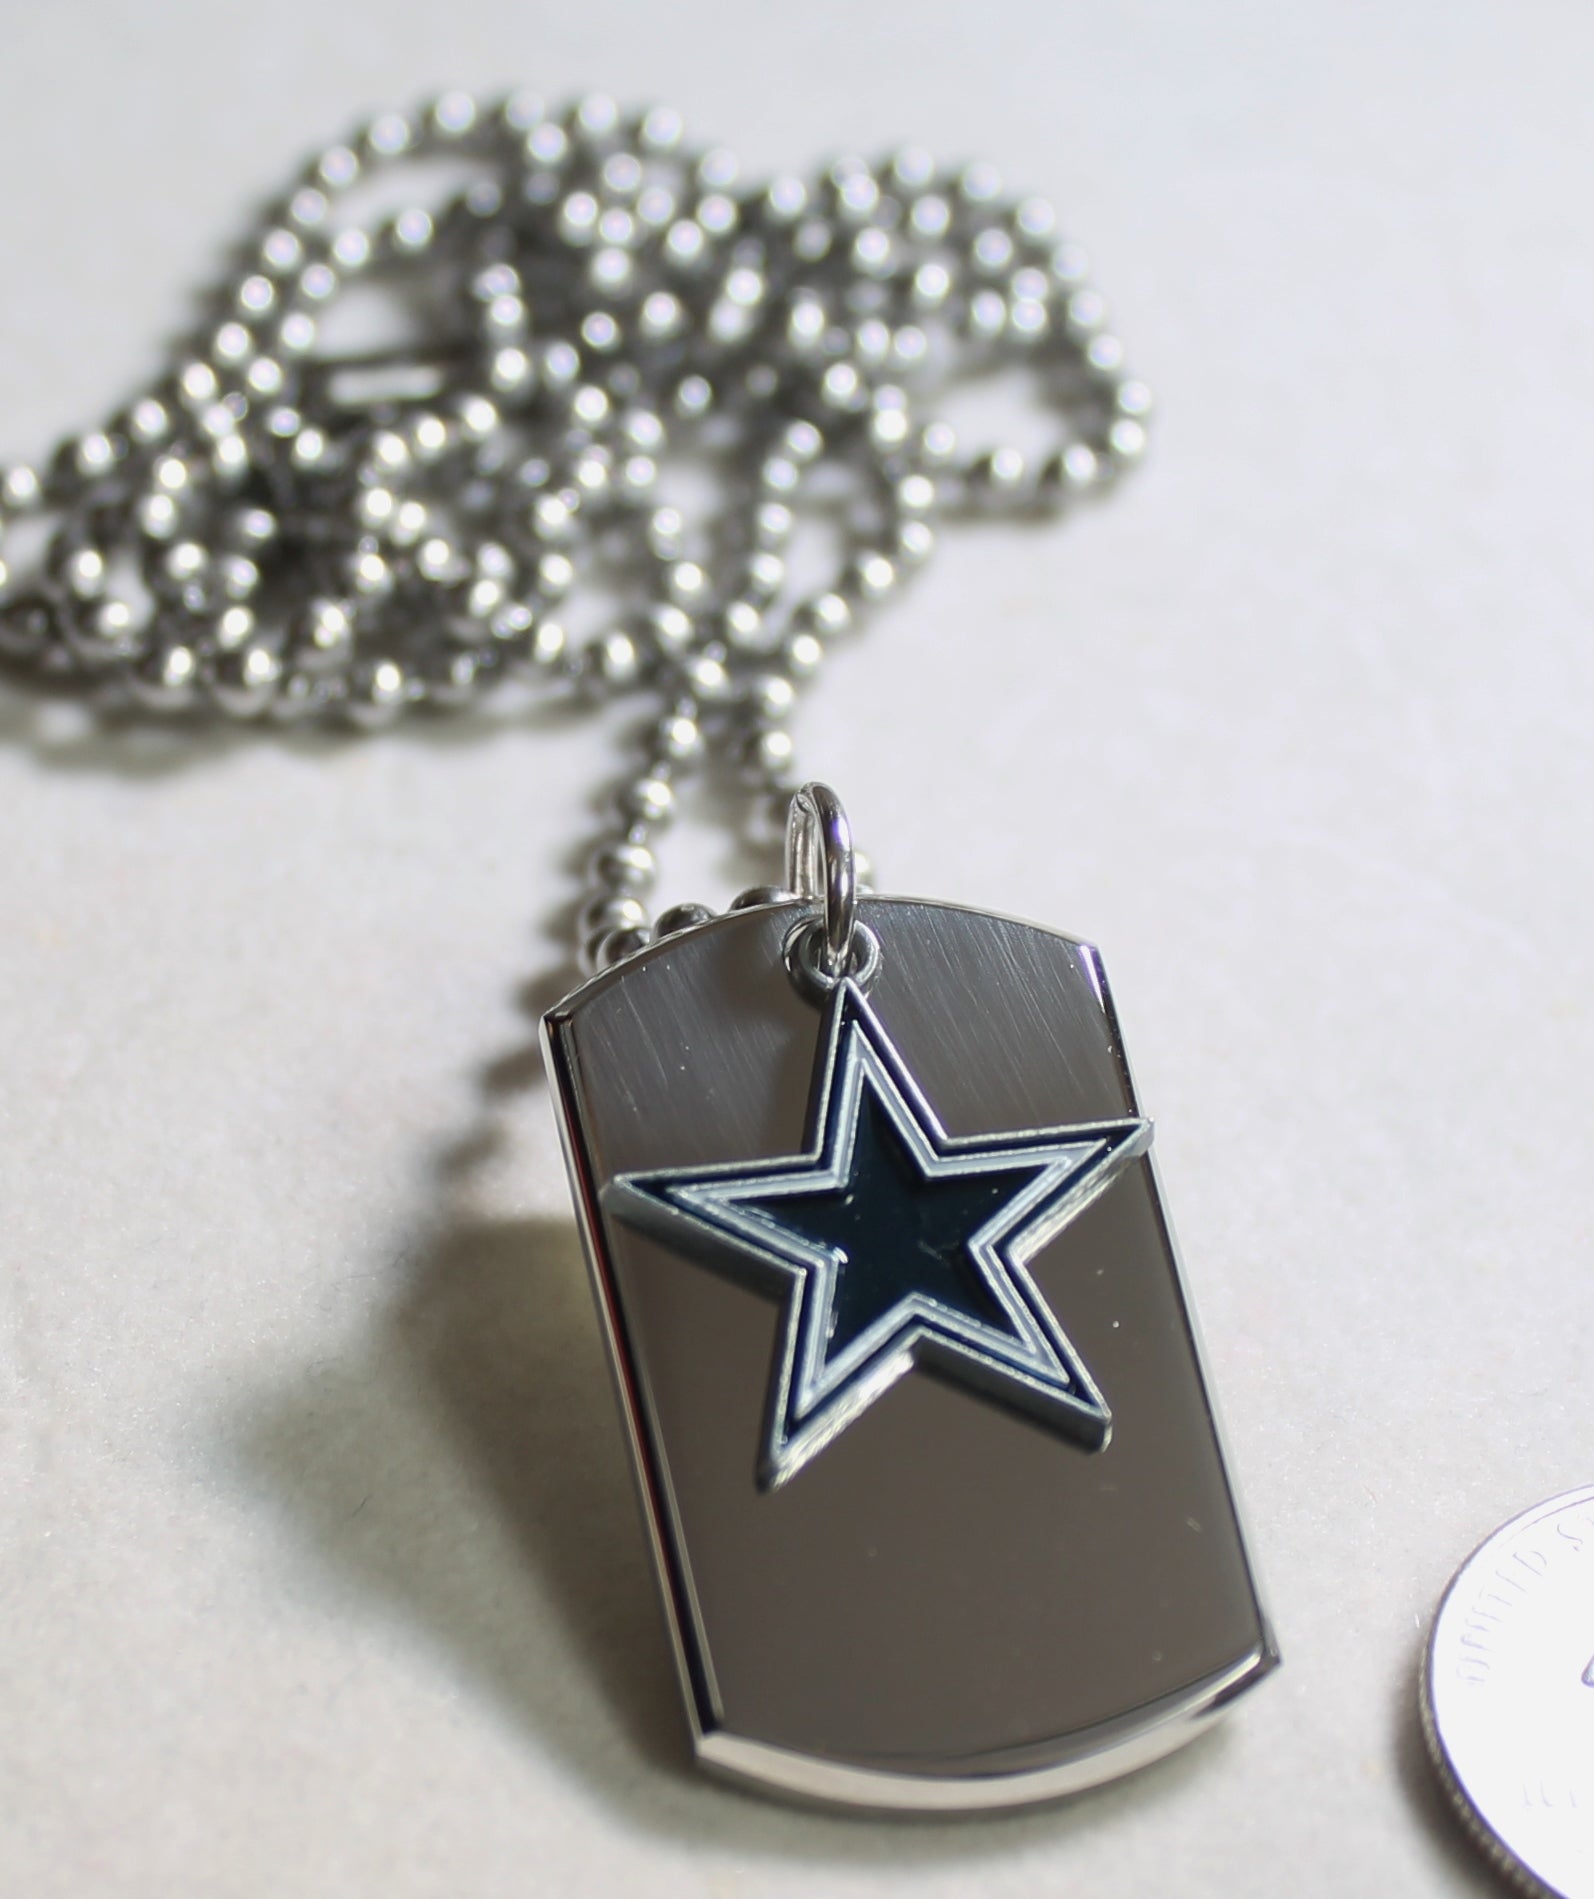 DALLAS COWBOYS NFL  STAINLESS STEEL STAR DOG TAG NECKLACE  3D BALL CHAIN